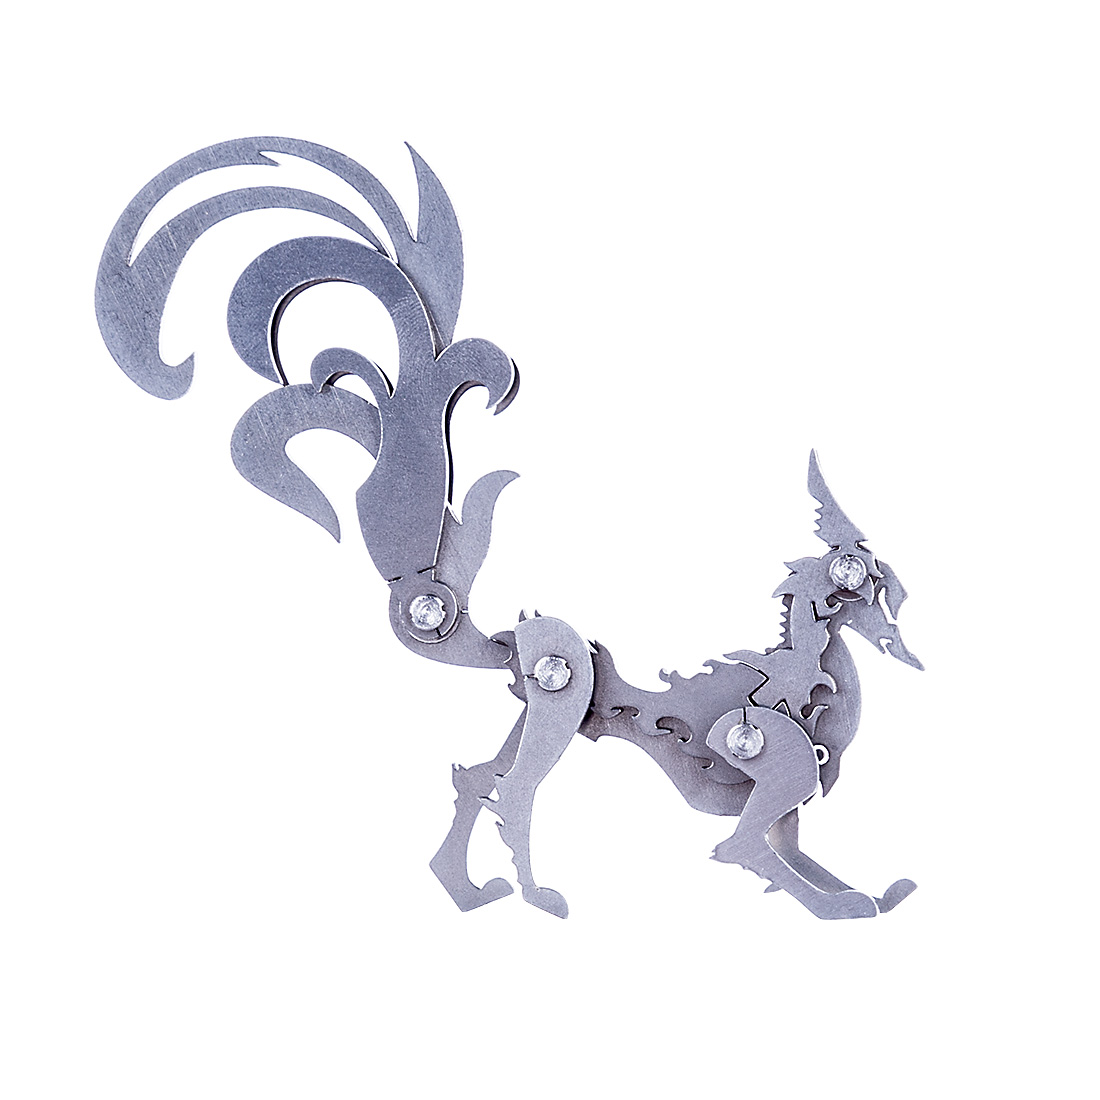 DIY Assembled Model Kit 3D Stainless Steel Assembled Detachable Model Puzzle Ornaments - Nine-tailed Fox